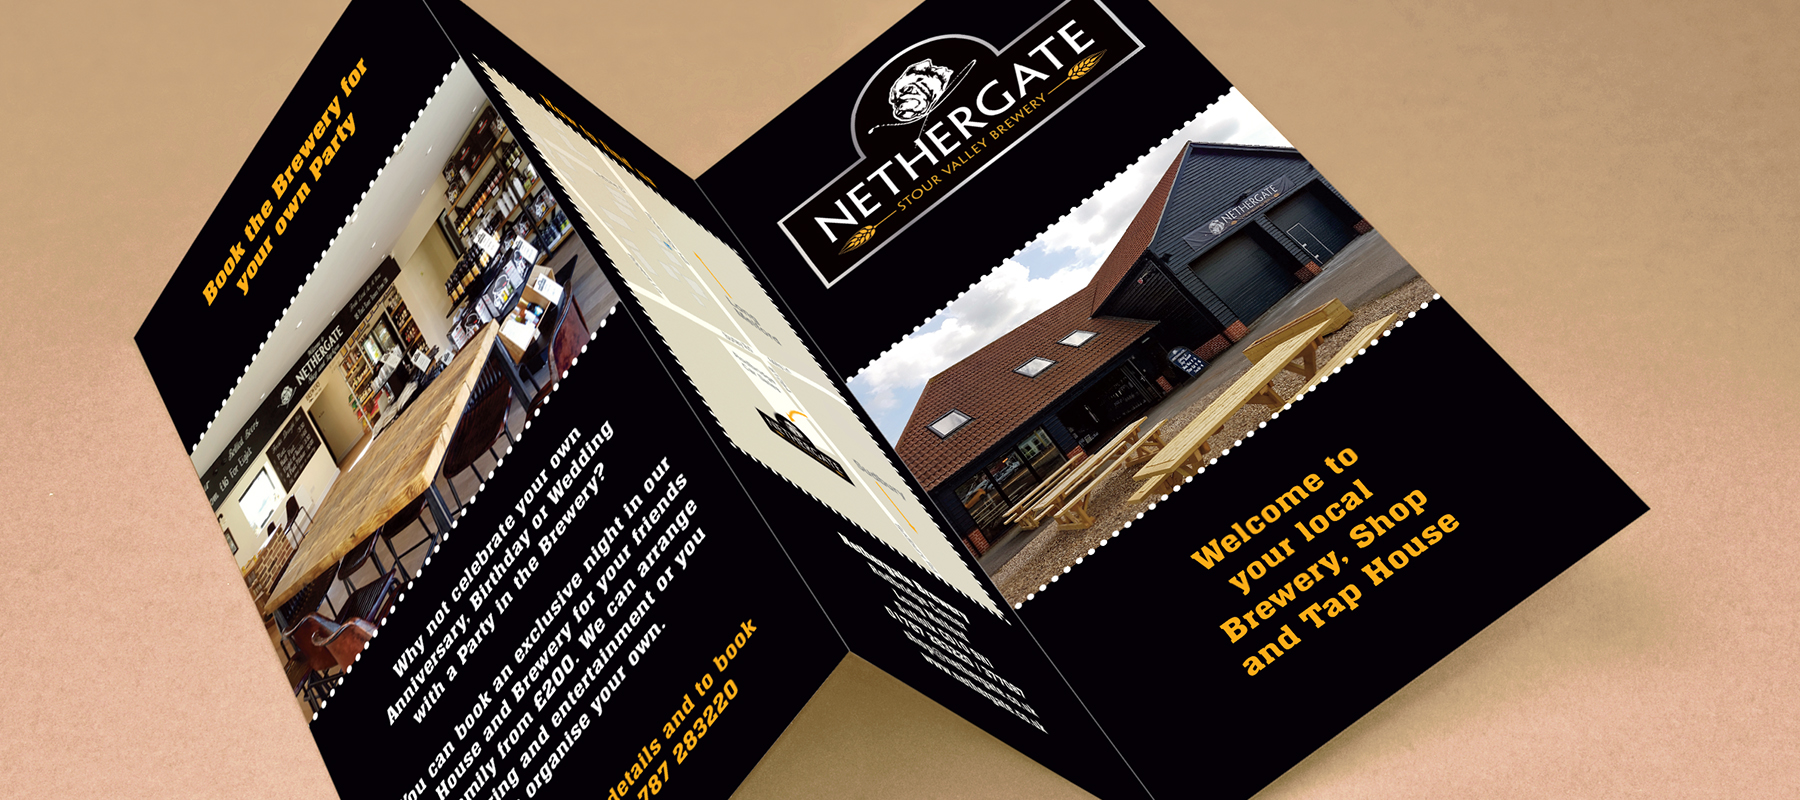 Nethergate Brewery and Shop - Brochure - Leaflet - Leaflet Design - A4 to DL Leaflet - Brochure Design - Sudbury - Suffolk